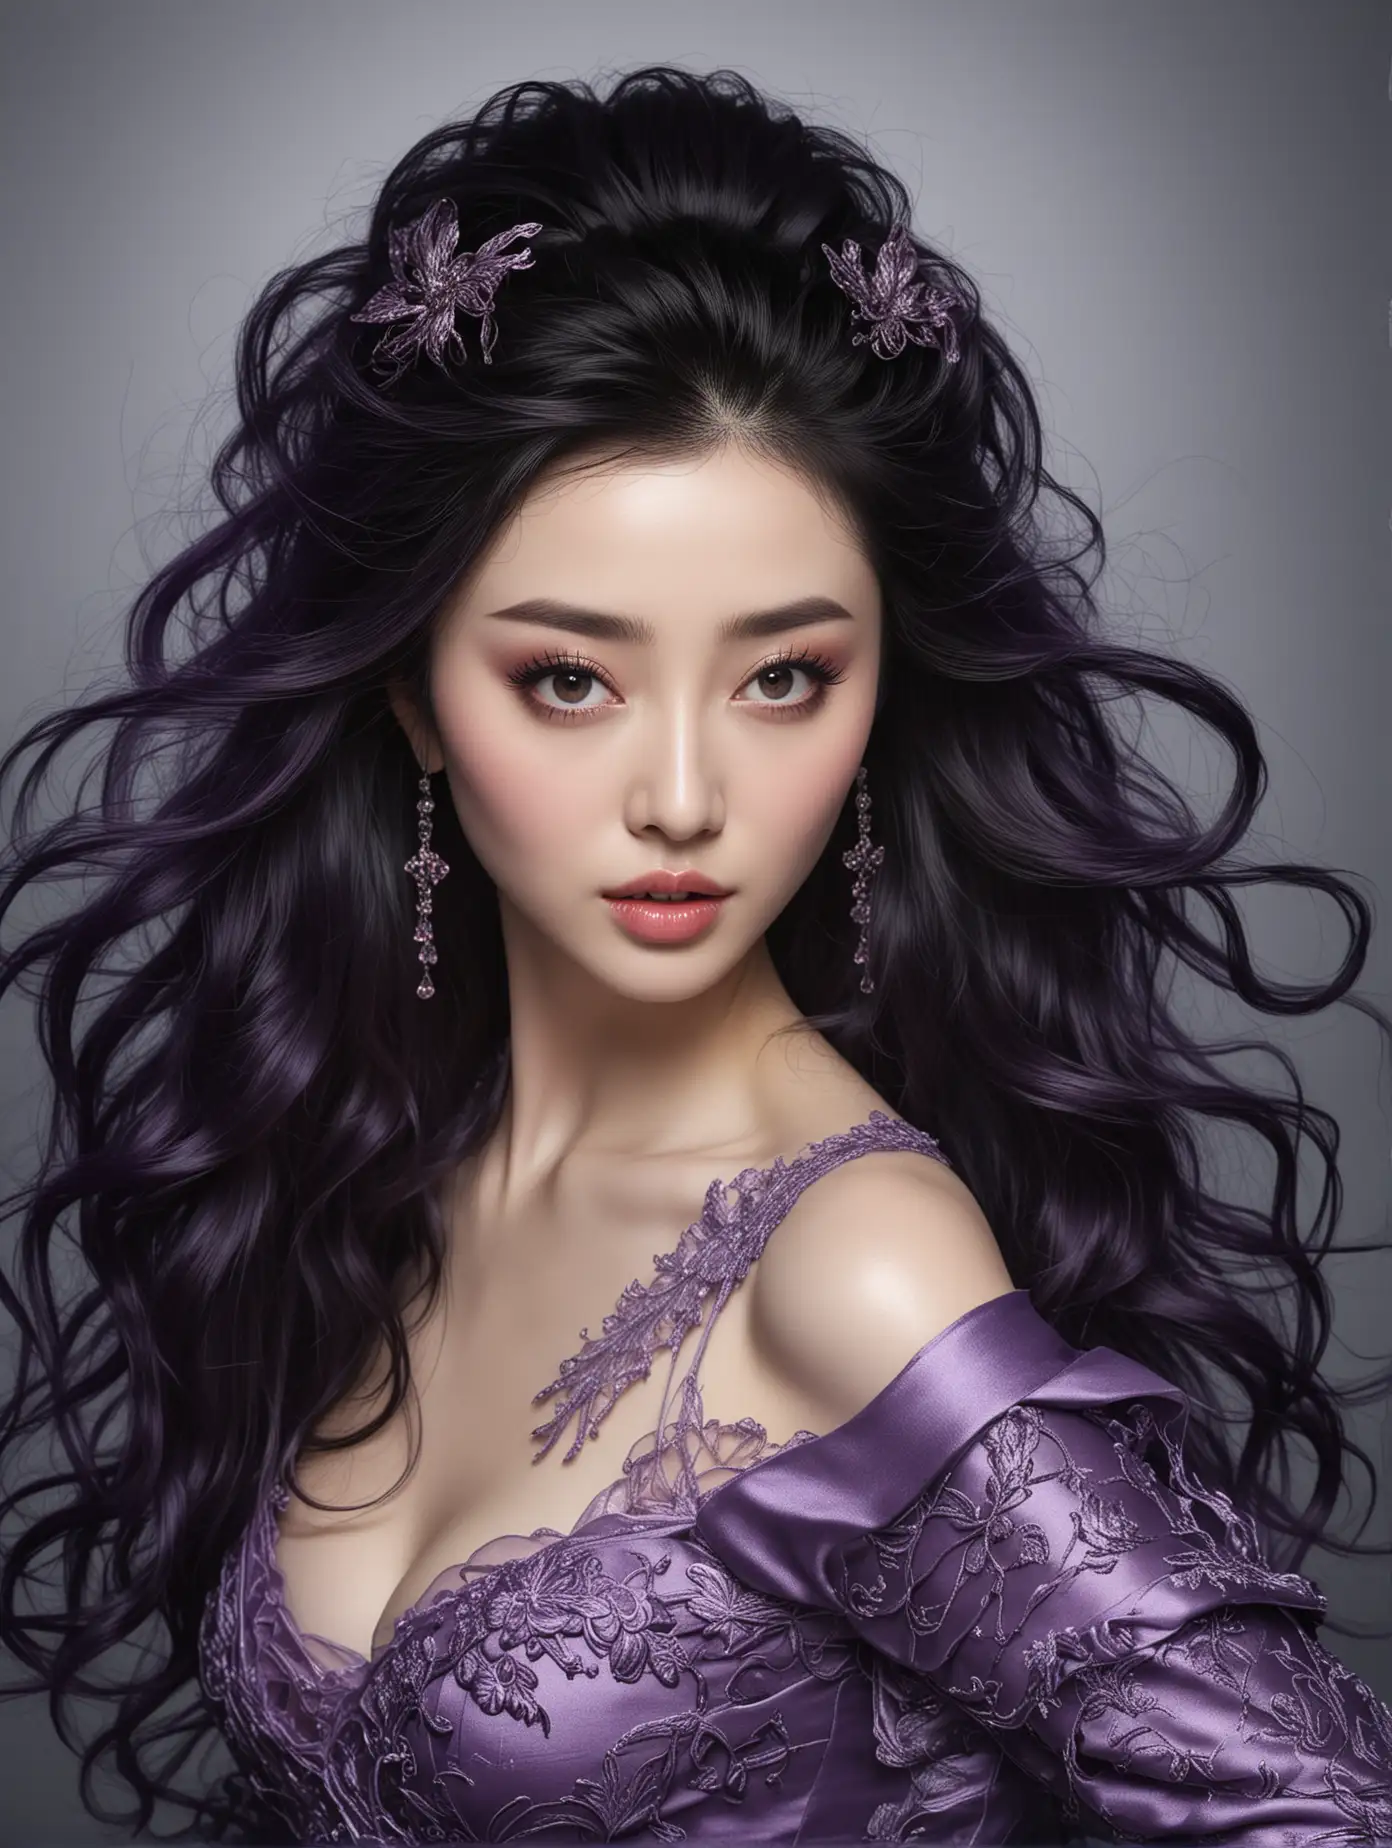 Fan bingbing is the centerpiece of the image, and every detail of her is rendered in intricate detail. Her hair is a deep shade of purple, falling in loose waves around her shoulders. Her face is angular, with high cheekbones and full lips. Her eyes are large and expressive, framed by thick lashes that fan outwards. She exudes a sense of strength and confidence, her body language conveying a sense of determination and purpose. full body view.